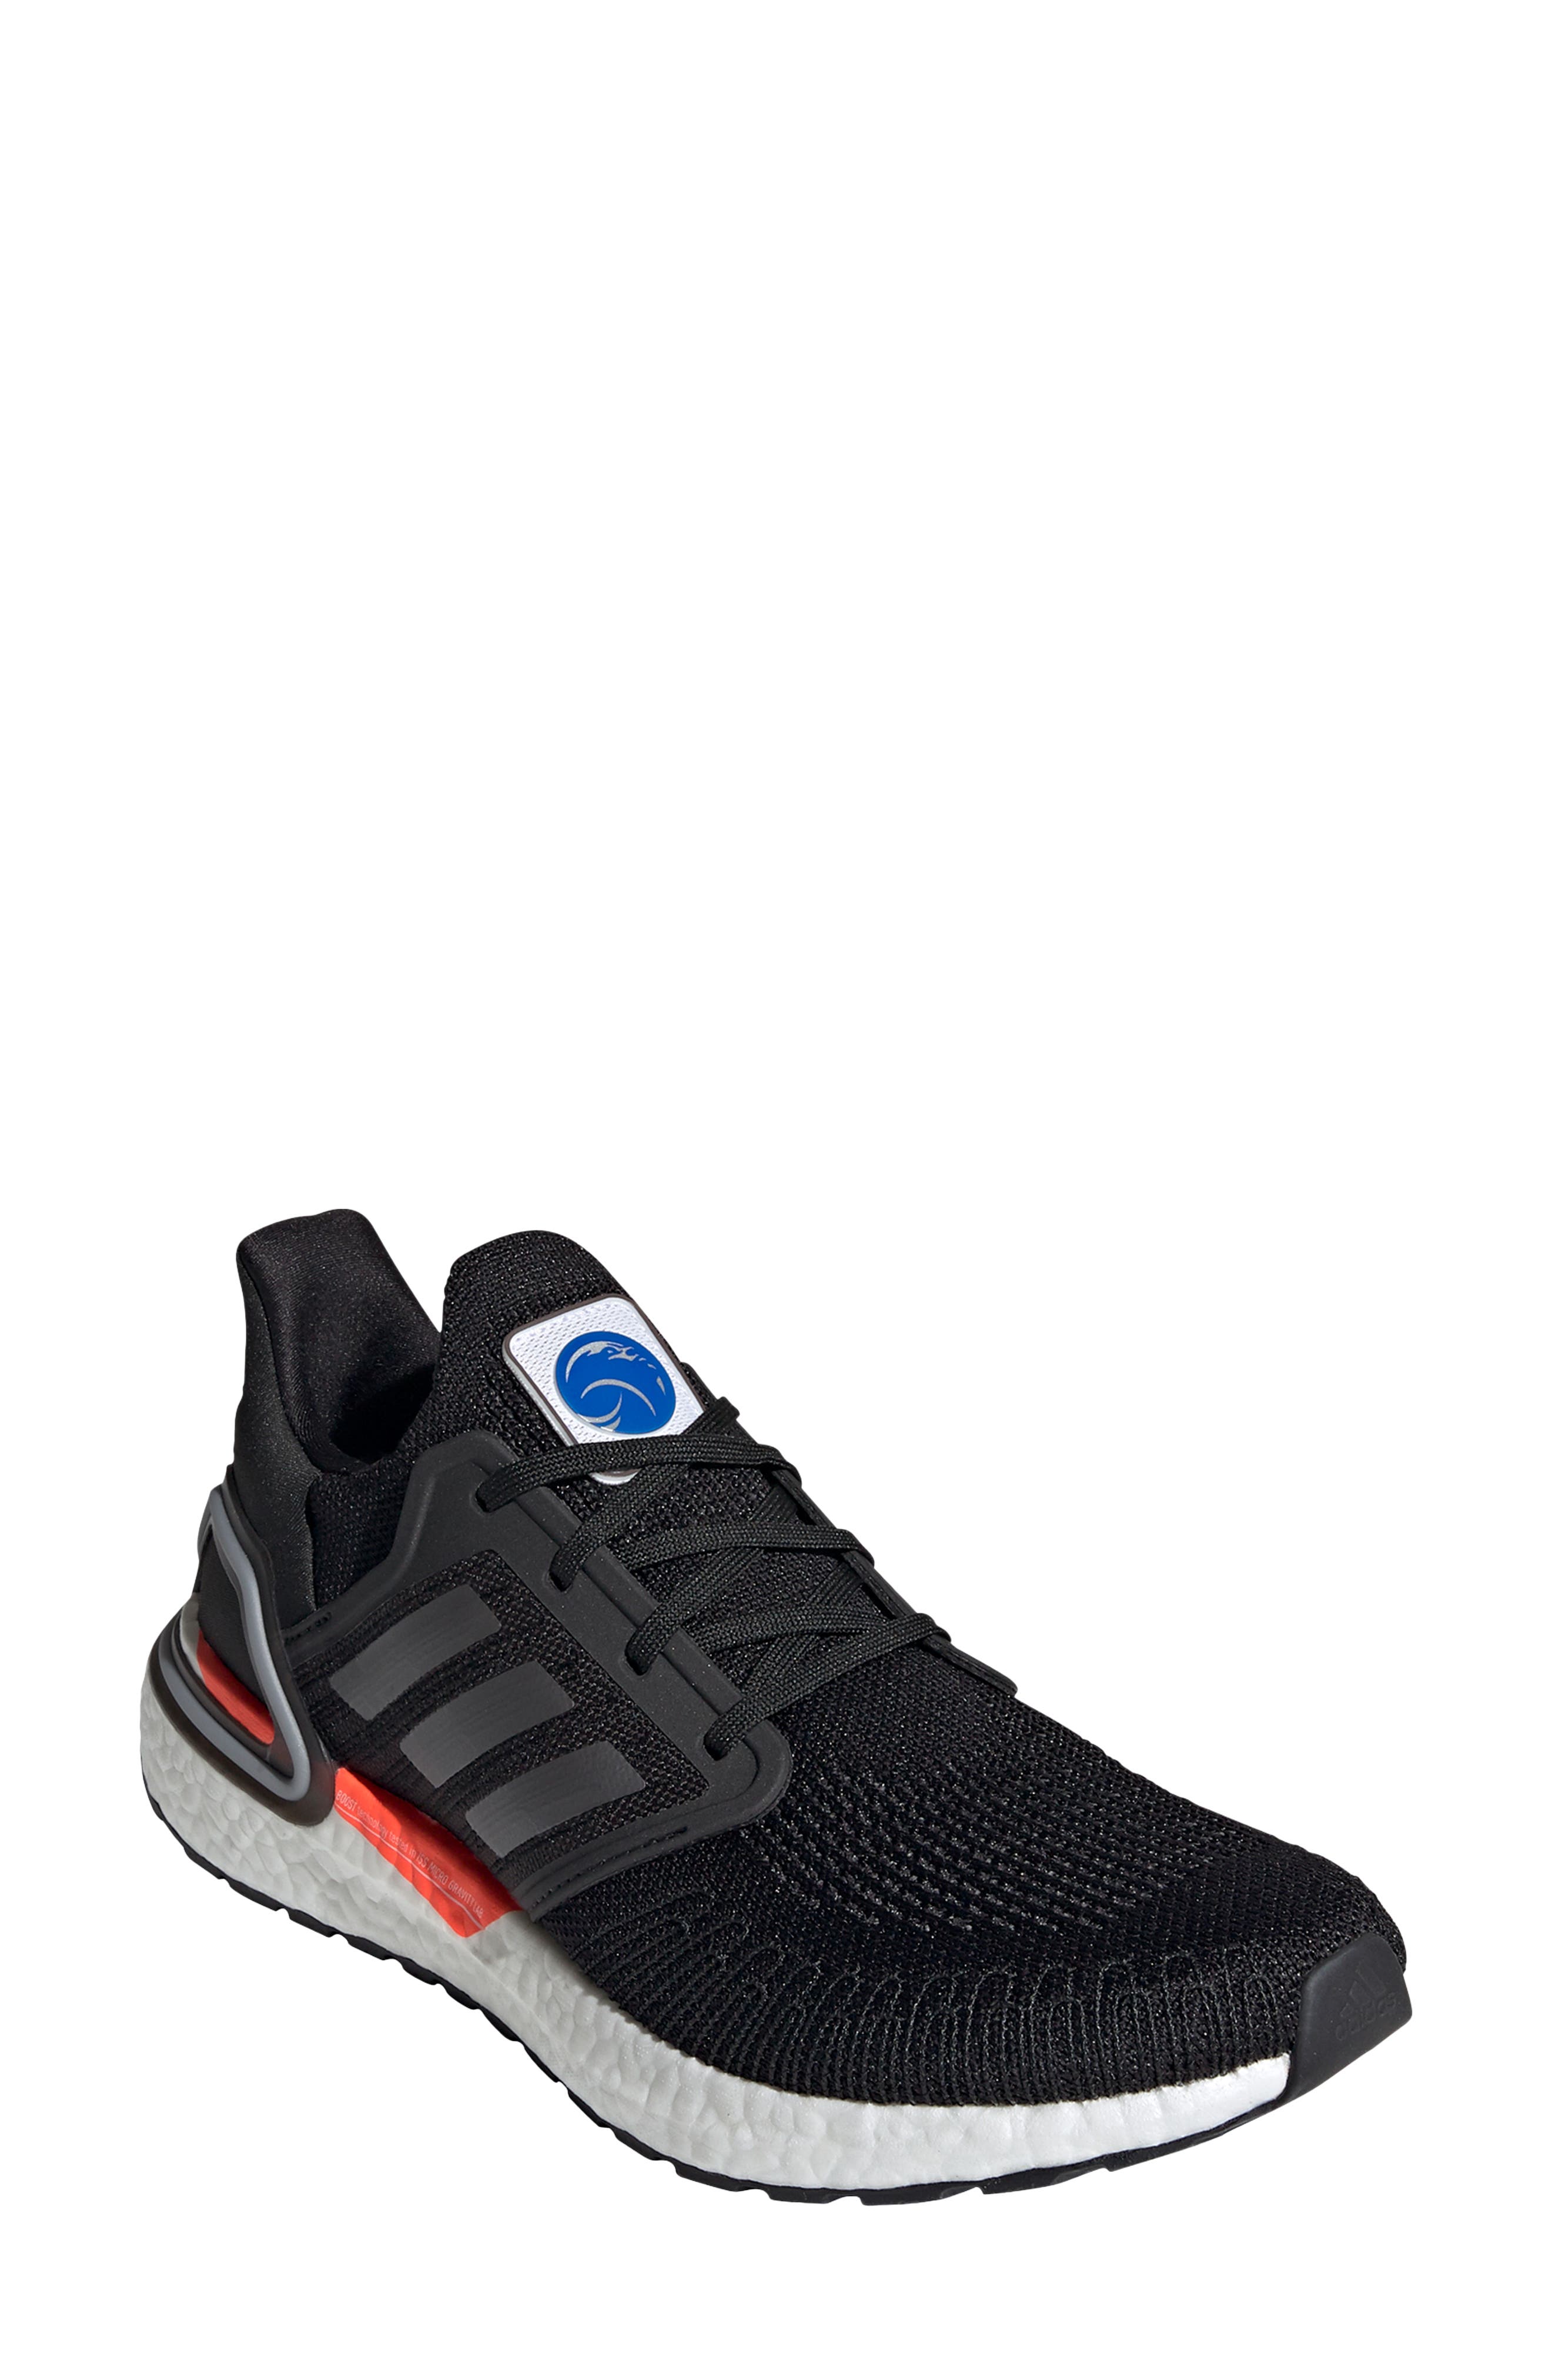 adidas clearance shoes mens